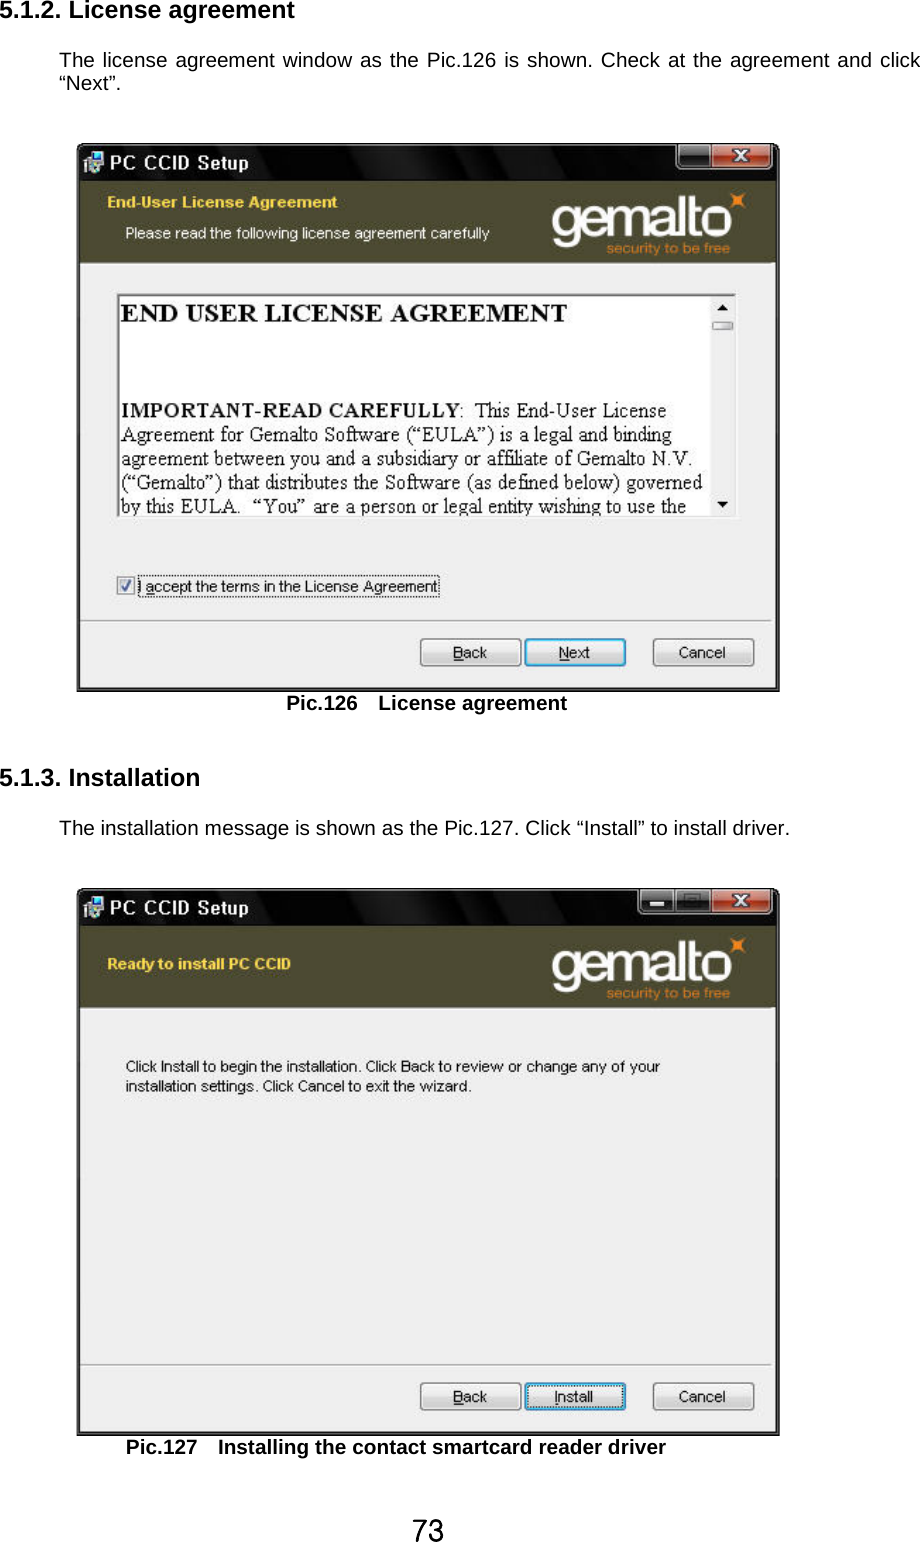 ^Z5.1.2. License agreementThe license agreement window as the Pic.126 is shown. Check at the agreement and click“Next”.Pic.126 License agreement5.1.3. InstallationThe installation message is shown as the Pic.127. Click “Install” to install driver.Pic.127 Installing the contact smartcard reader driver